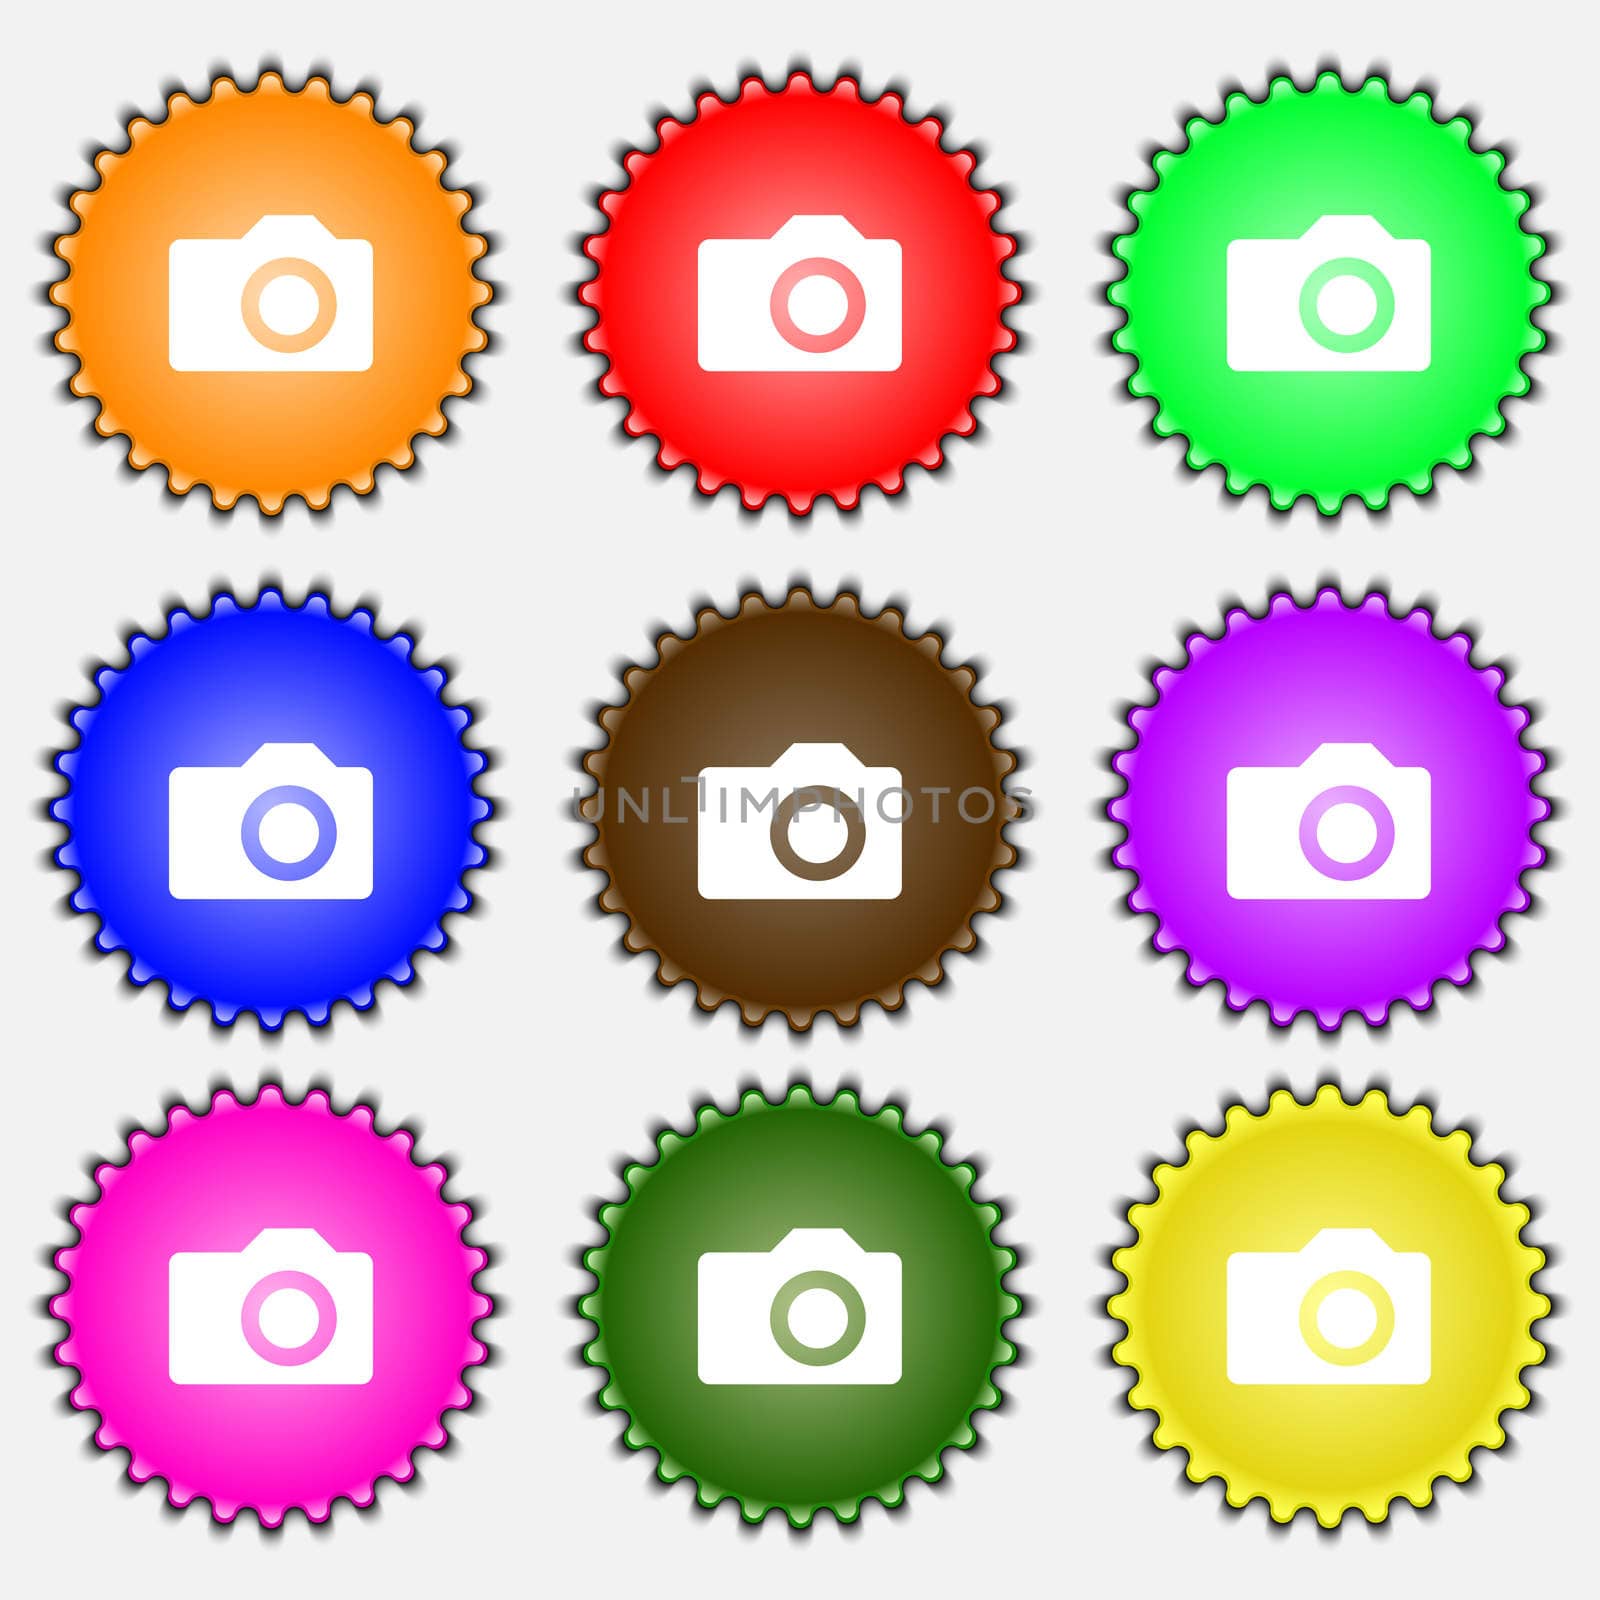 Digital photo camera icon sign. A set of nine different colored labels. illustration 